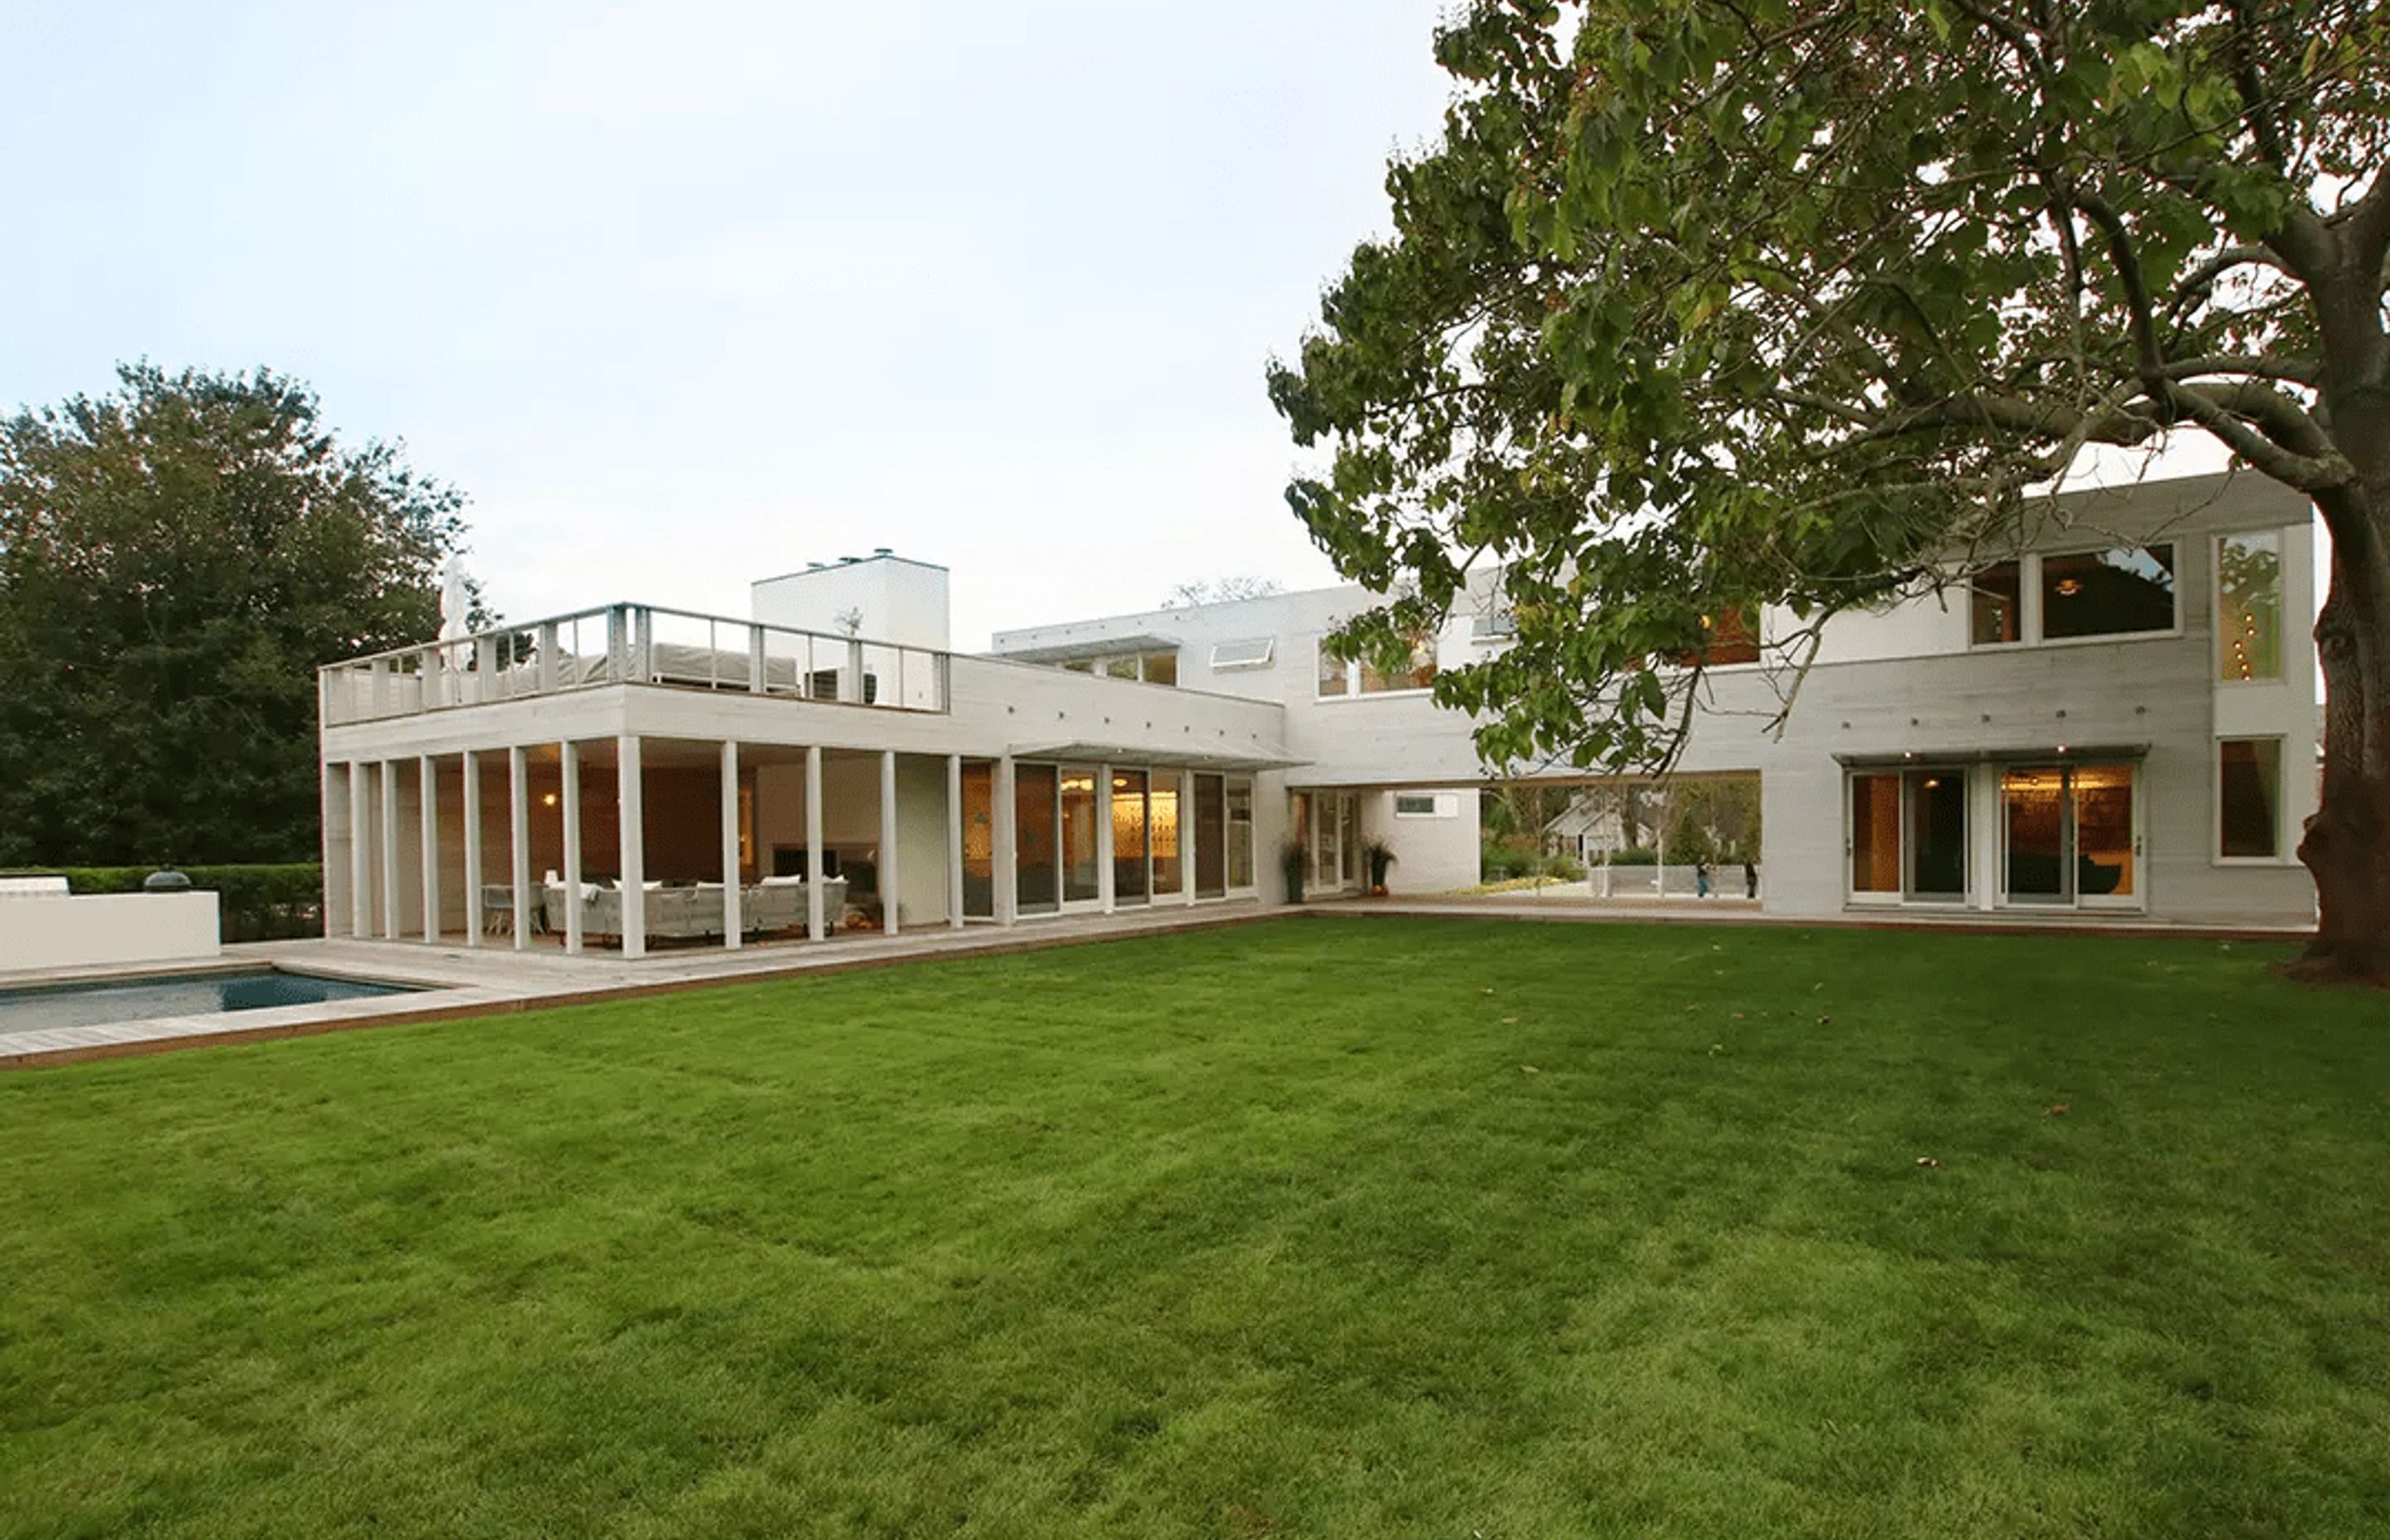 A rear view of the seven-bedroom modular home in Bridgehampton, N.Y., designed by Resolution 4 Architecture.